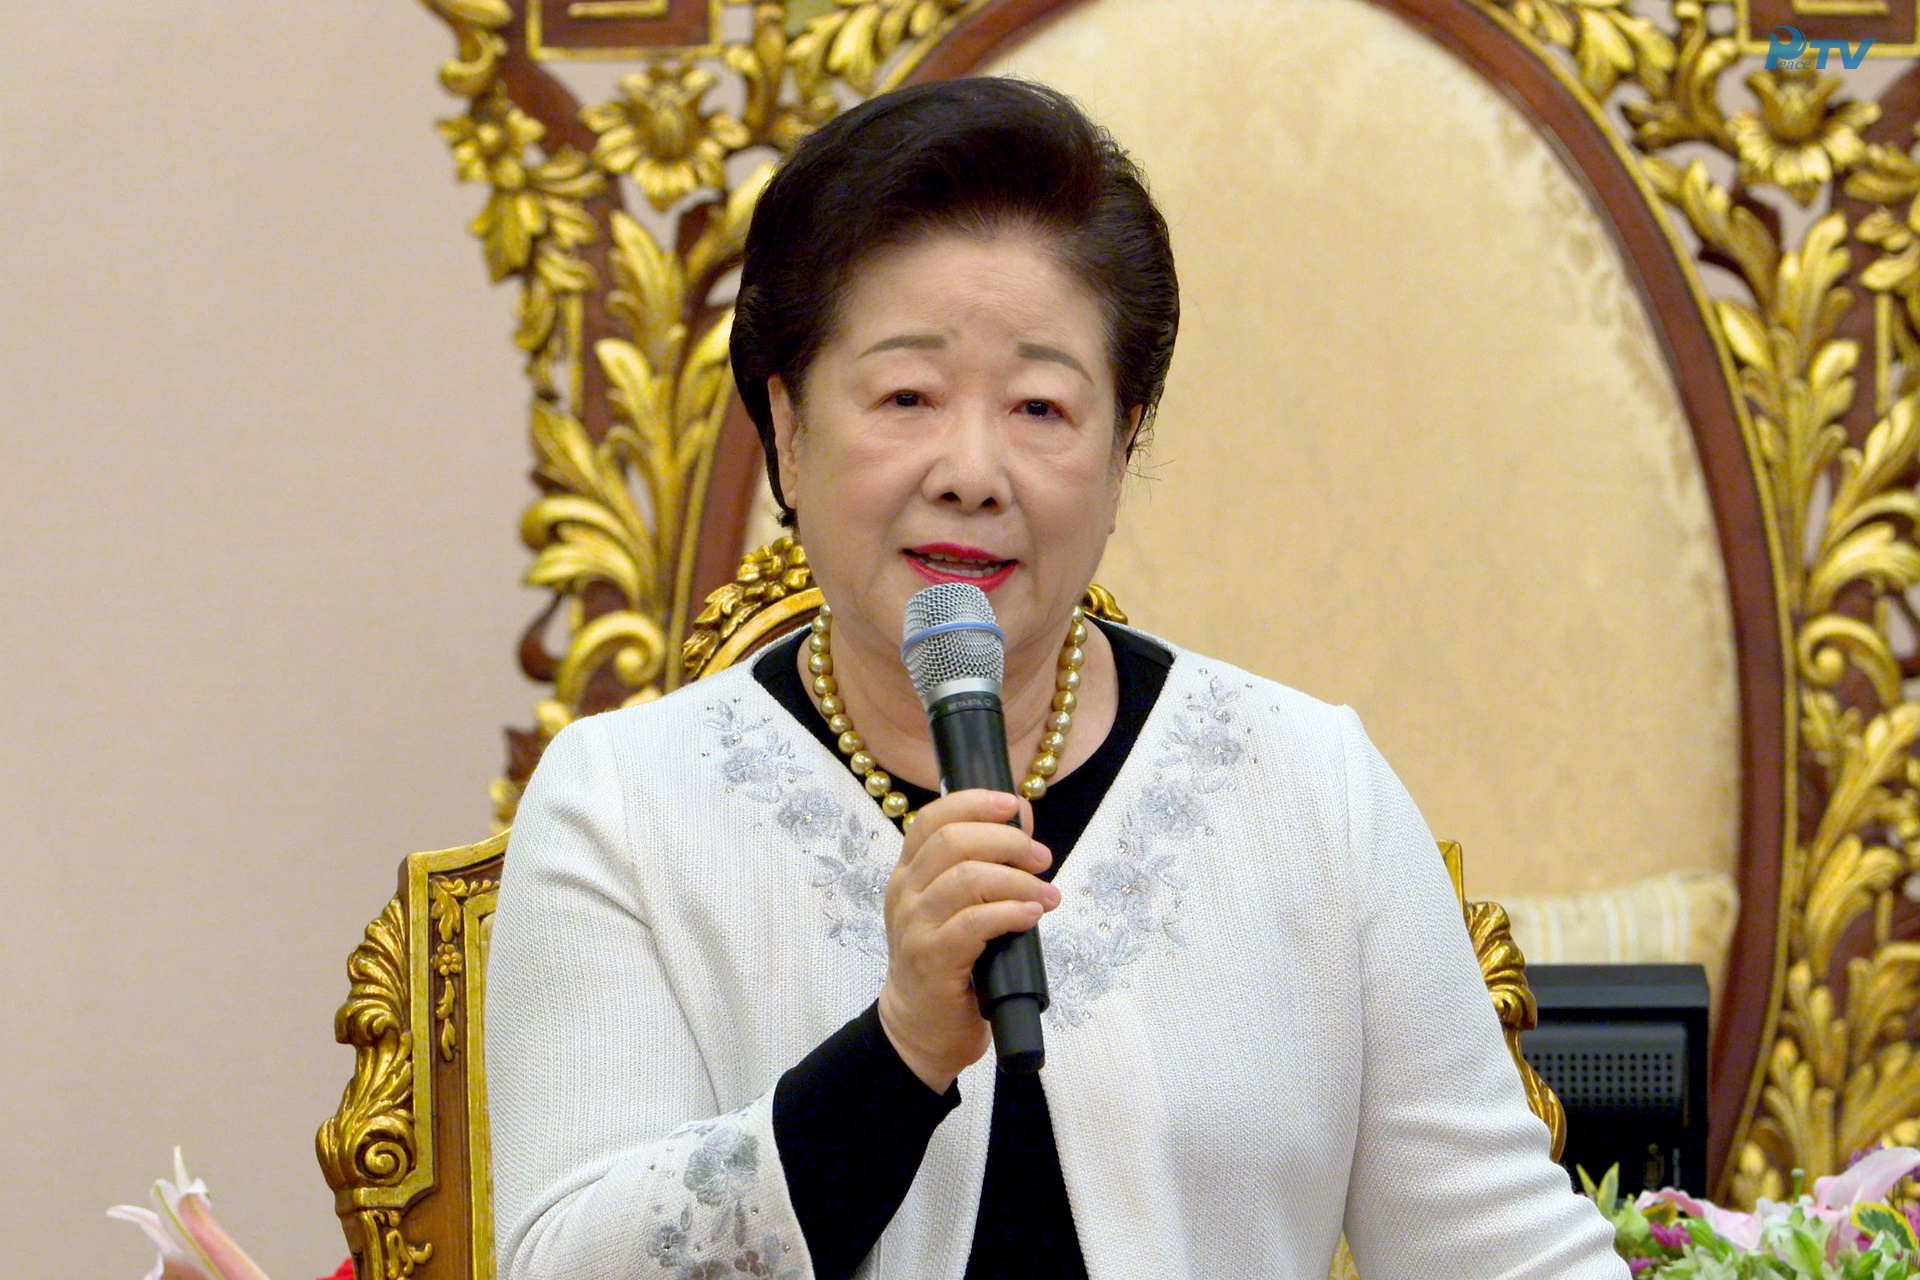 Special Gathering of HJ Cheonwon Leaders Hosted by True Parents (May 1, 2019 at Cheong Jeong Gun)